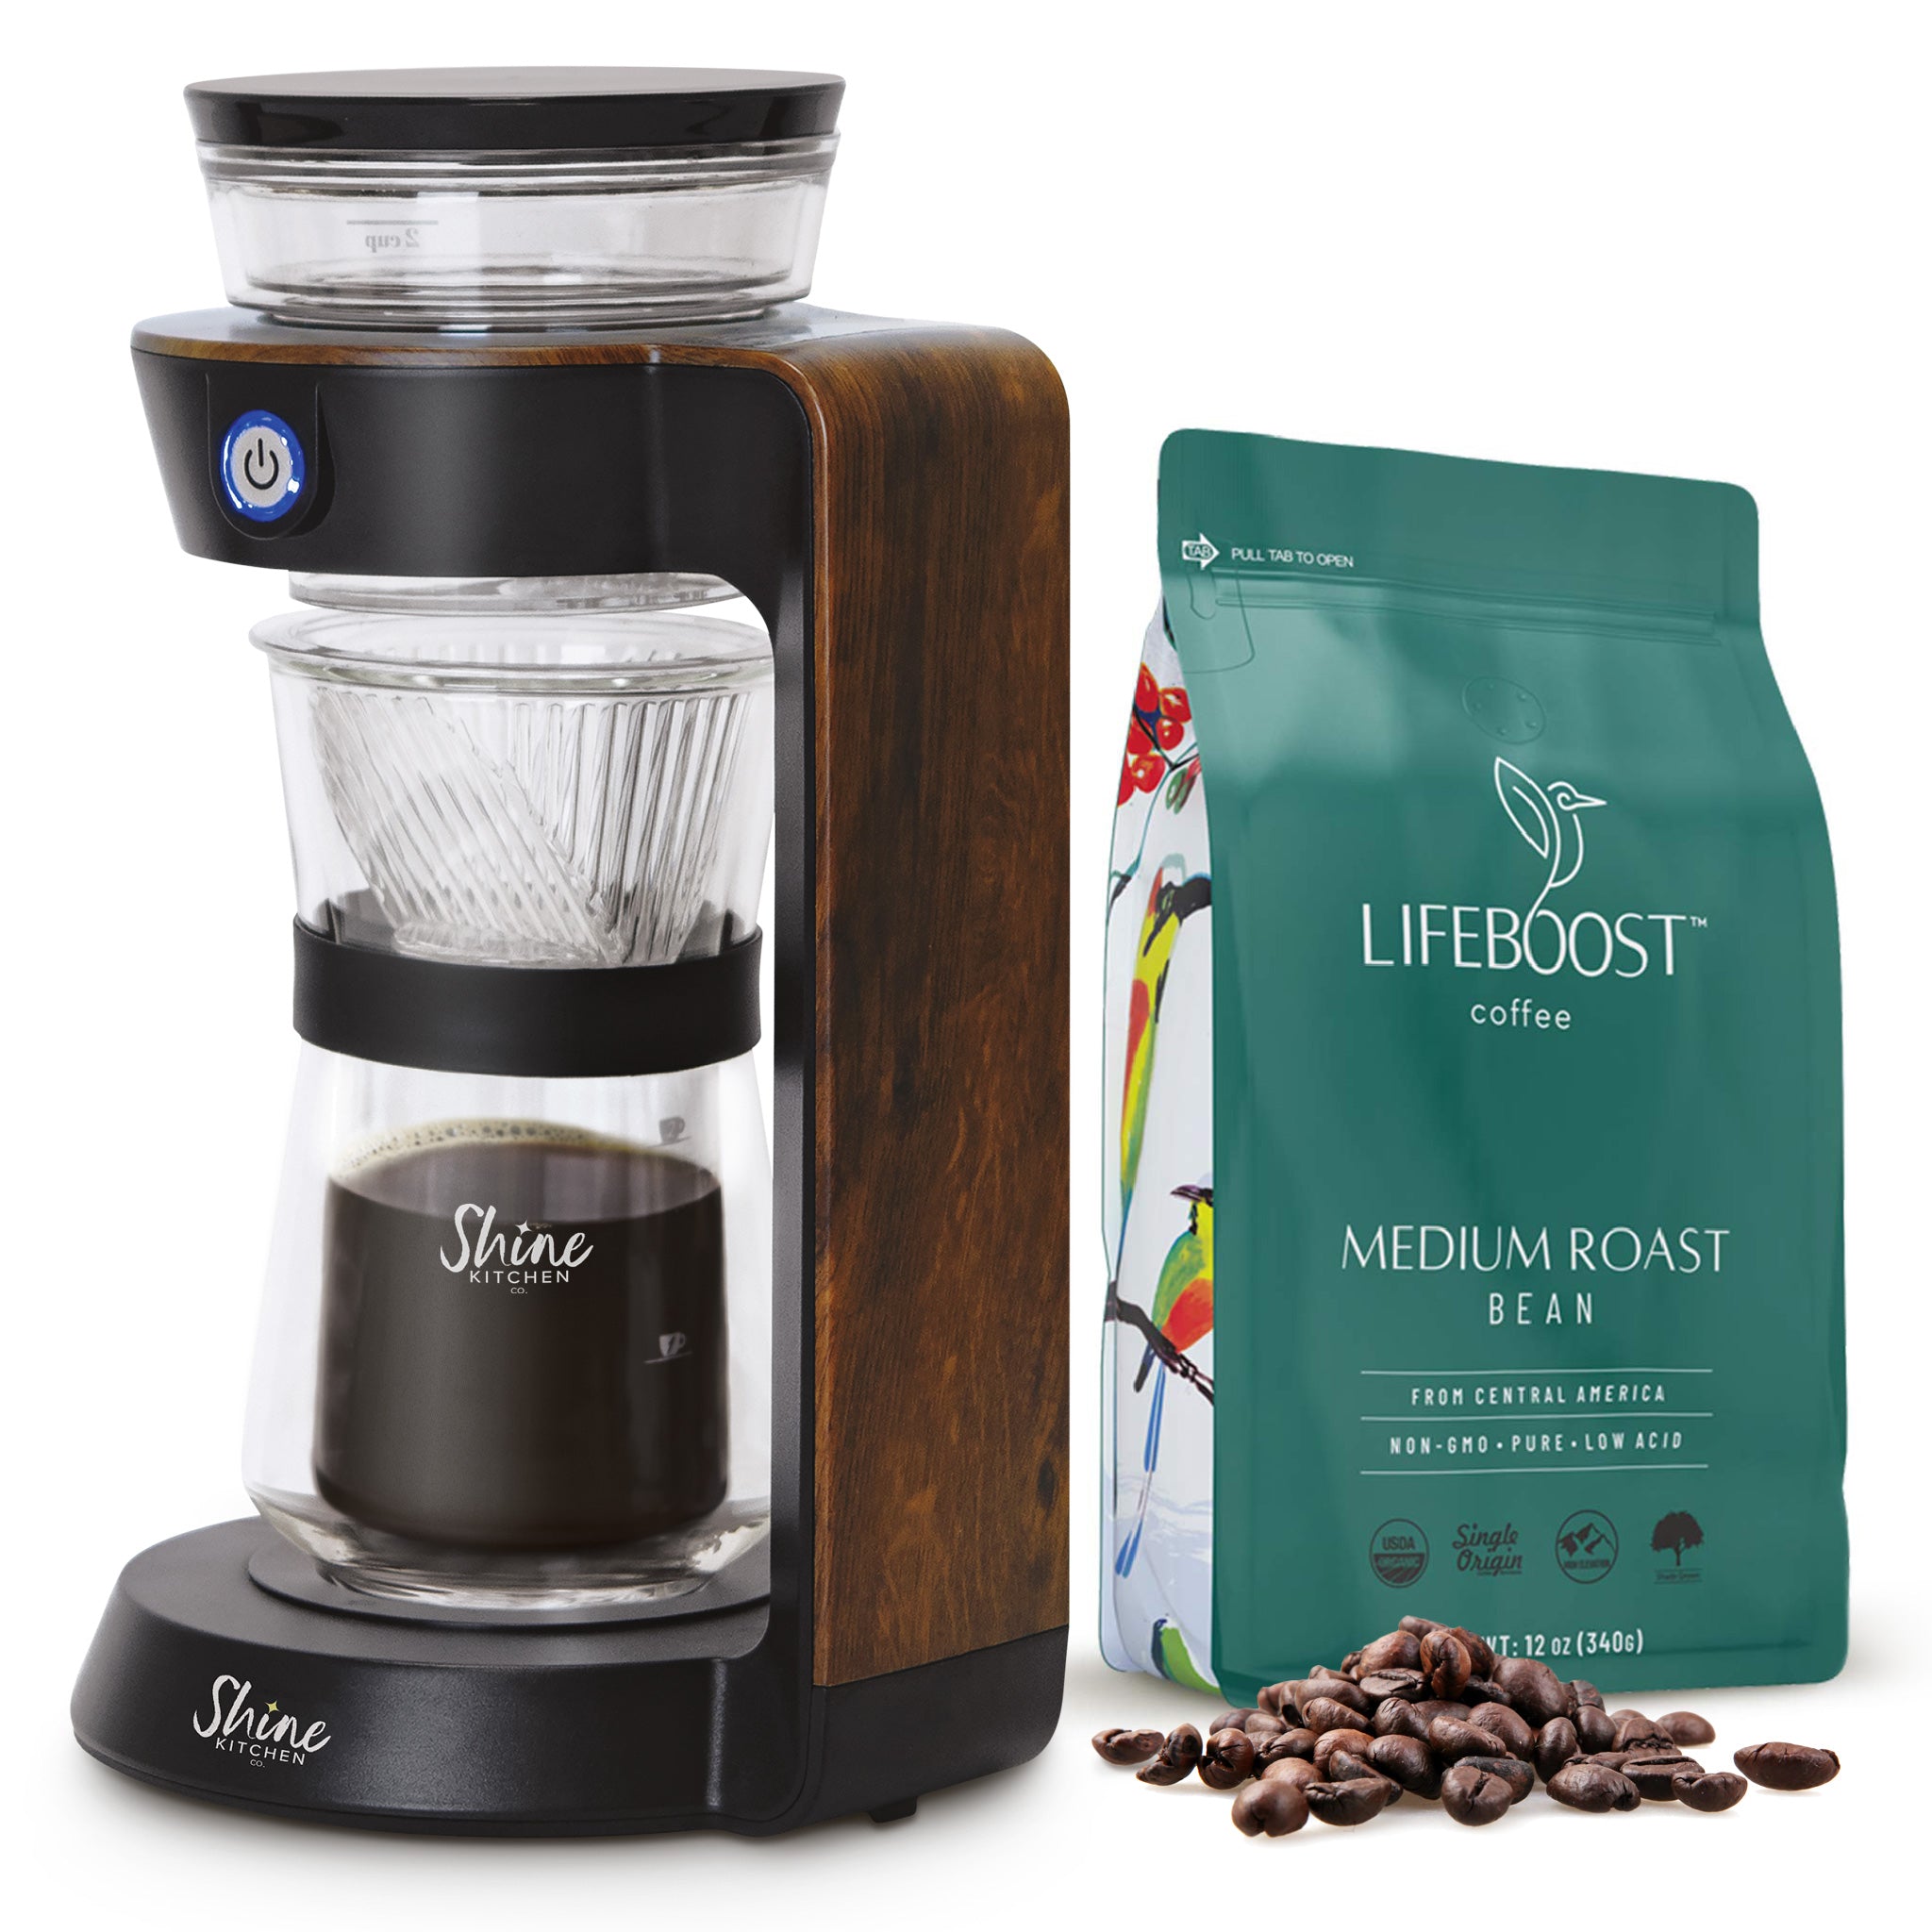 Shine Kitchen Co.® Automatic Pour Over Coffee Machine and Lifeboost Co